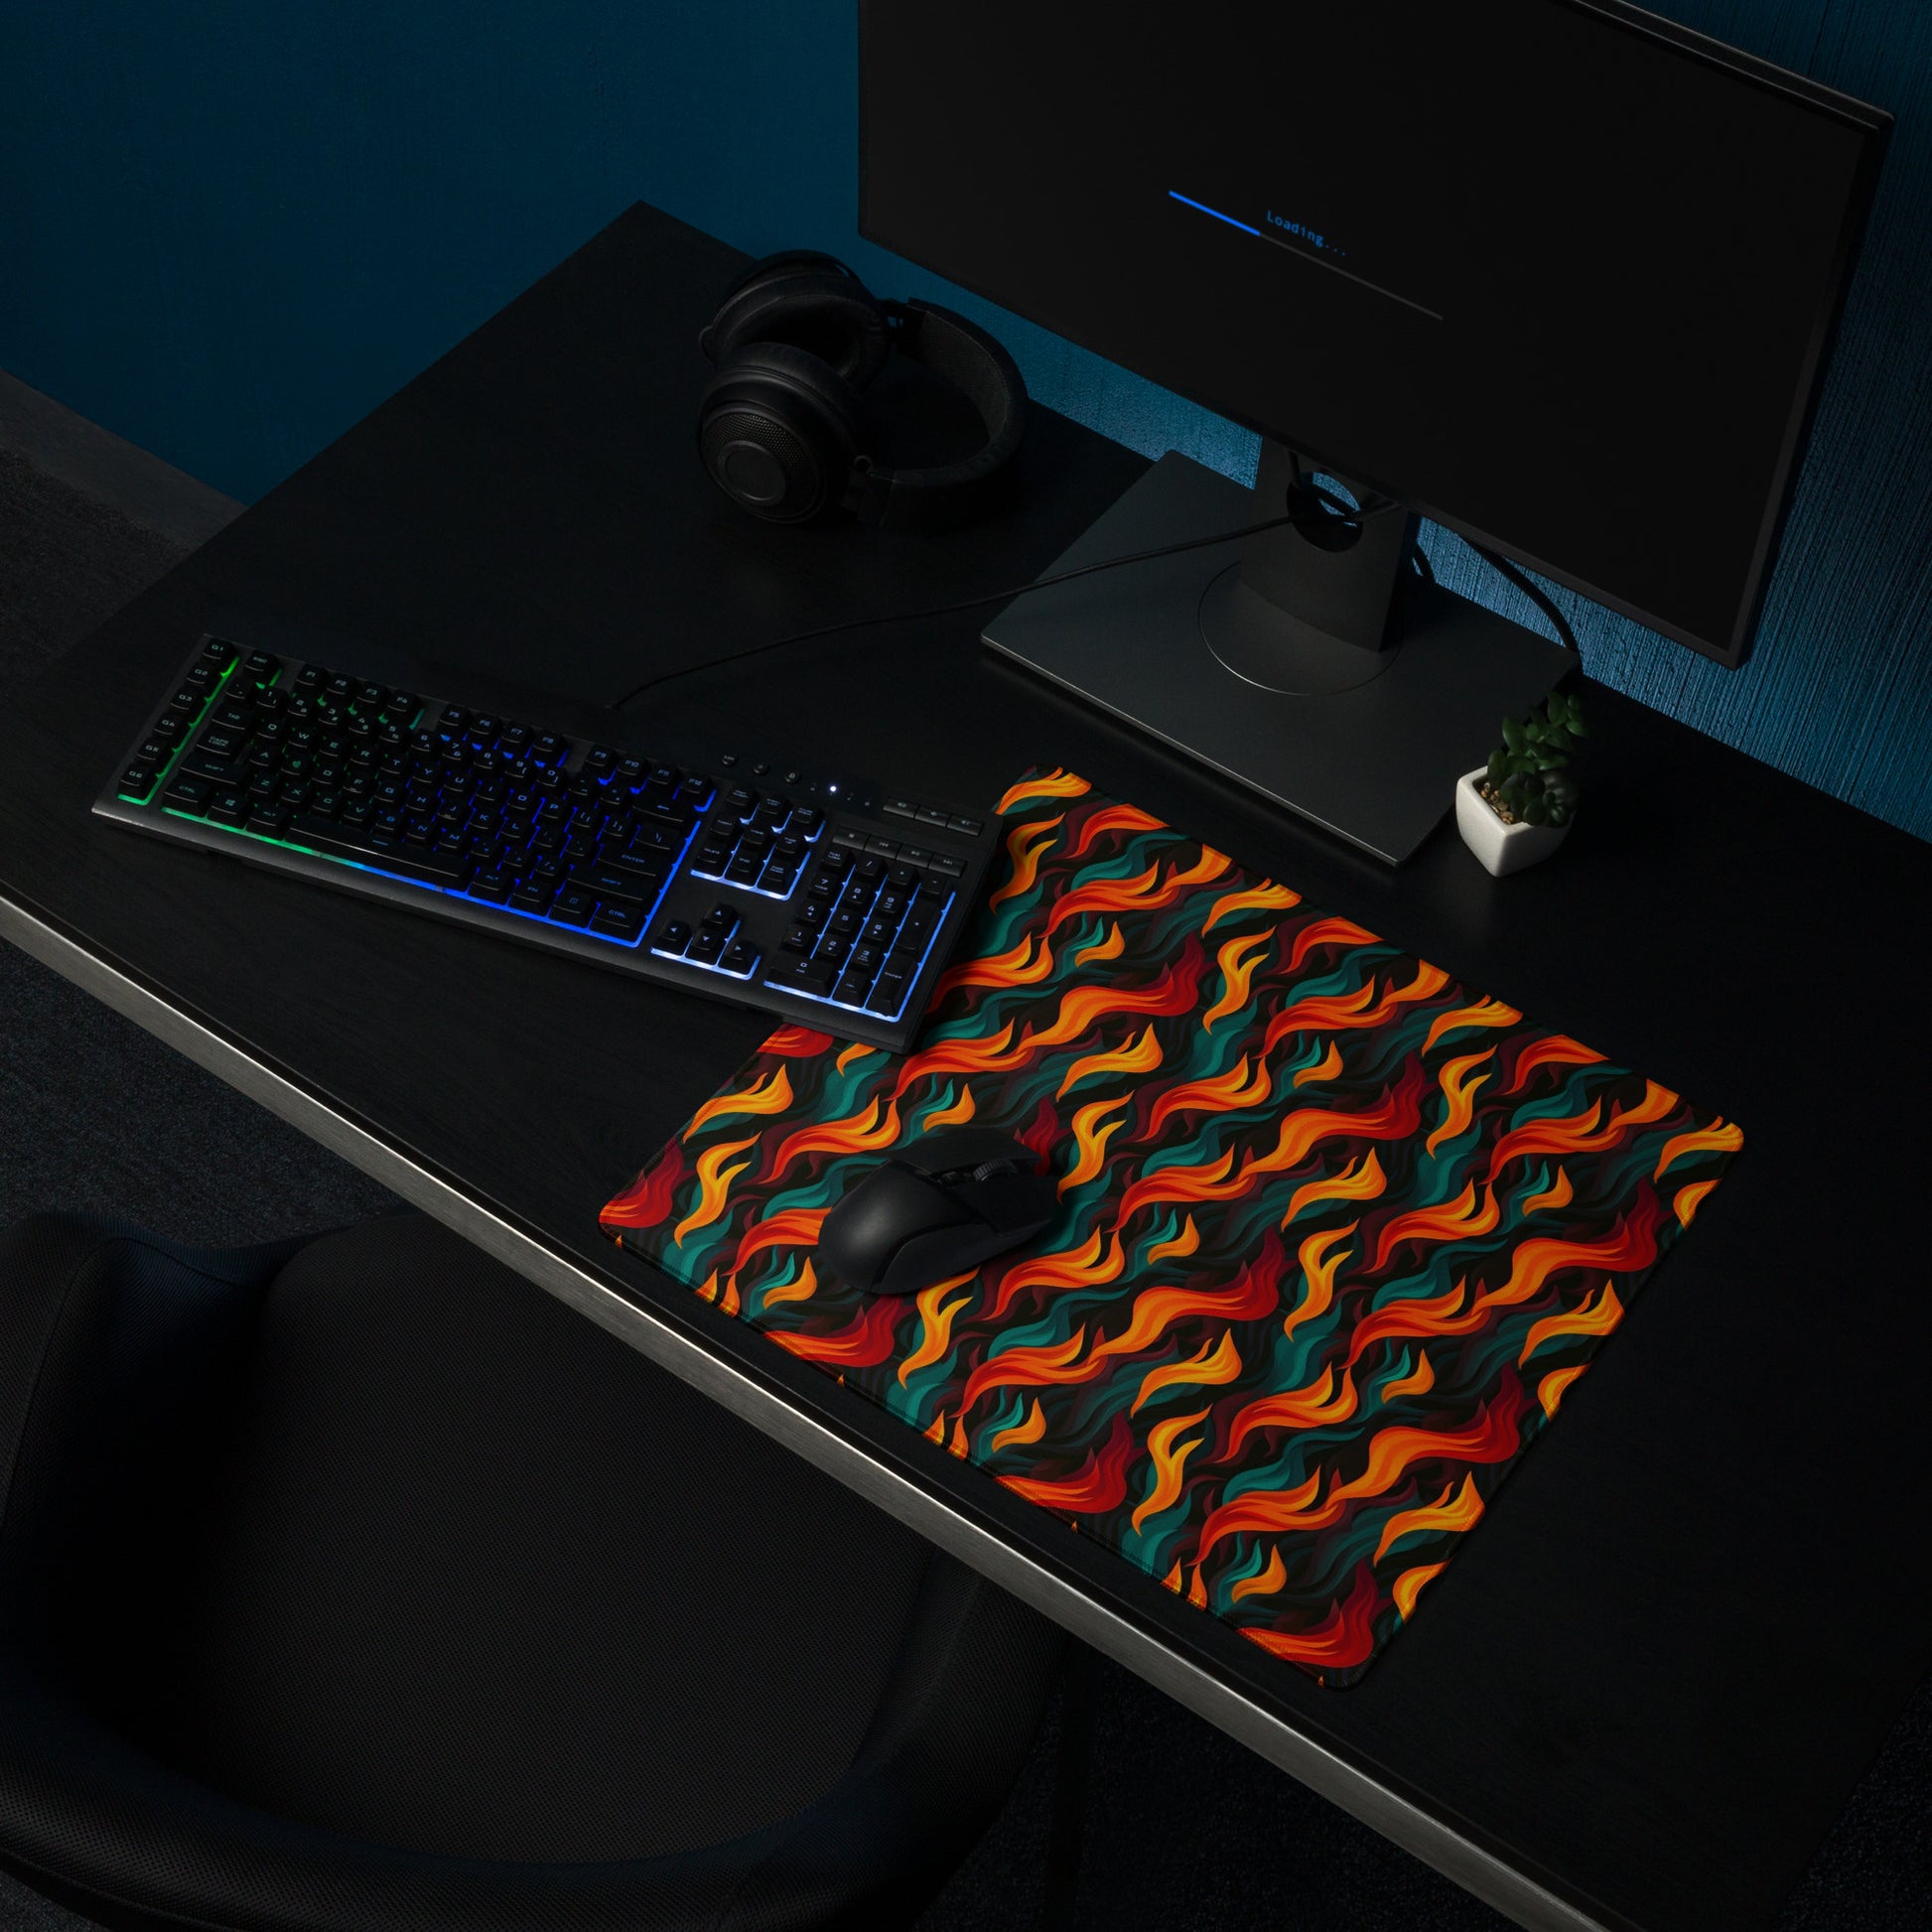 A 36" x 18" desk pad with a wavy flame pattern on it shown on a desk setup. Red and Teal in color.